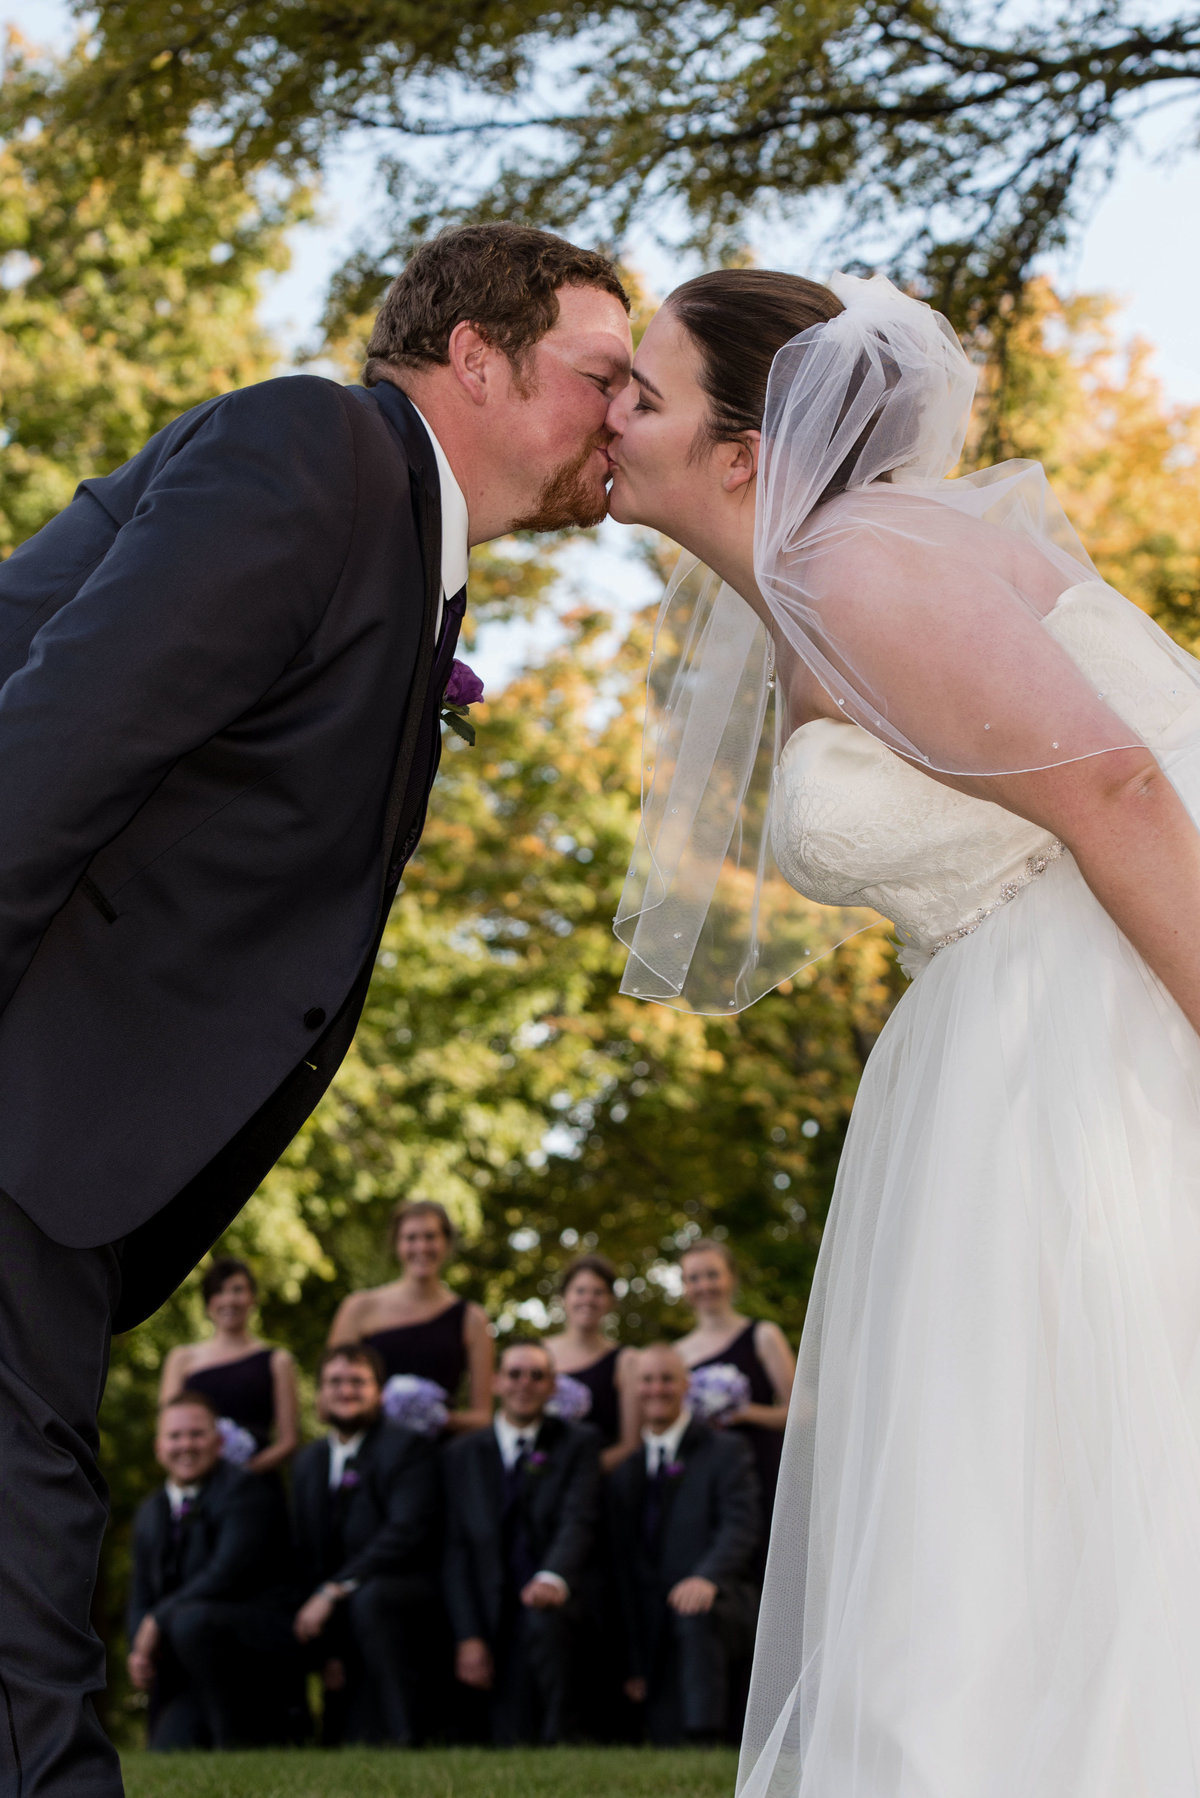 kiss with bridal party in background